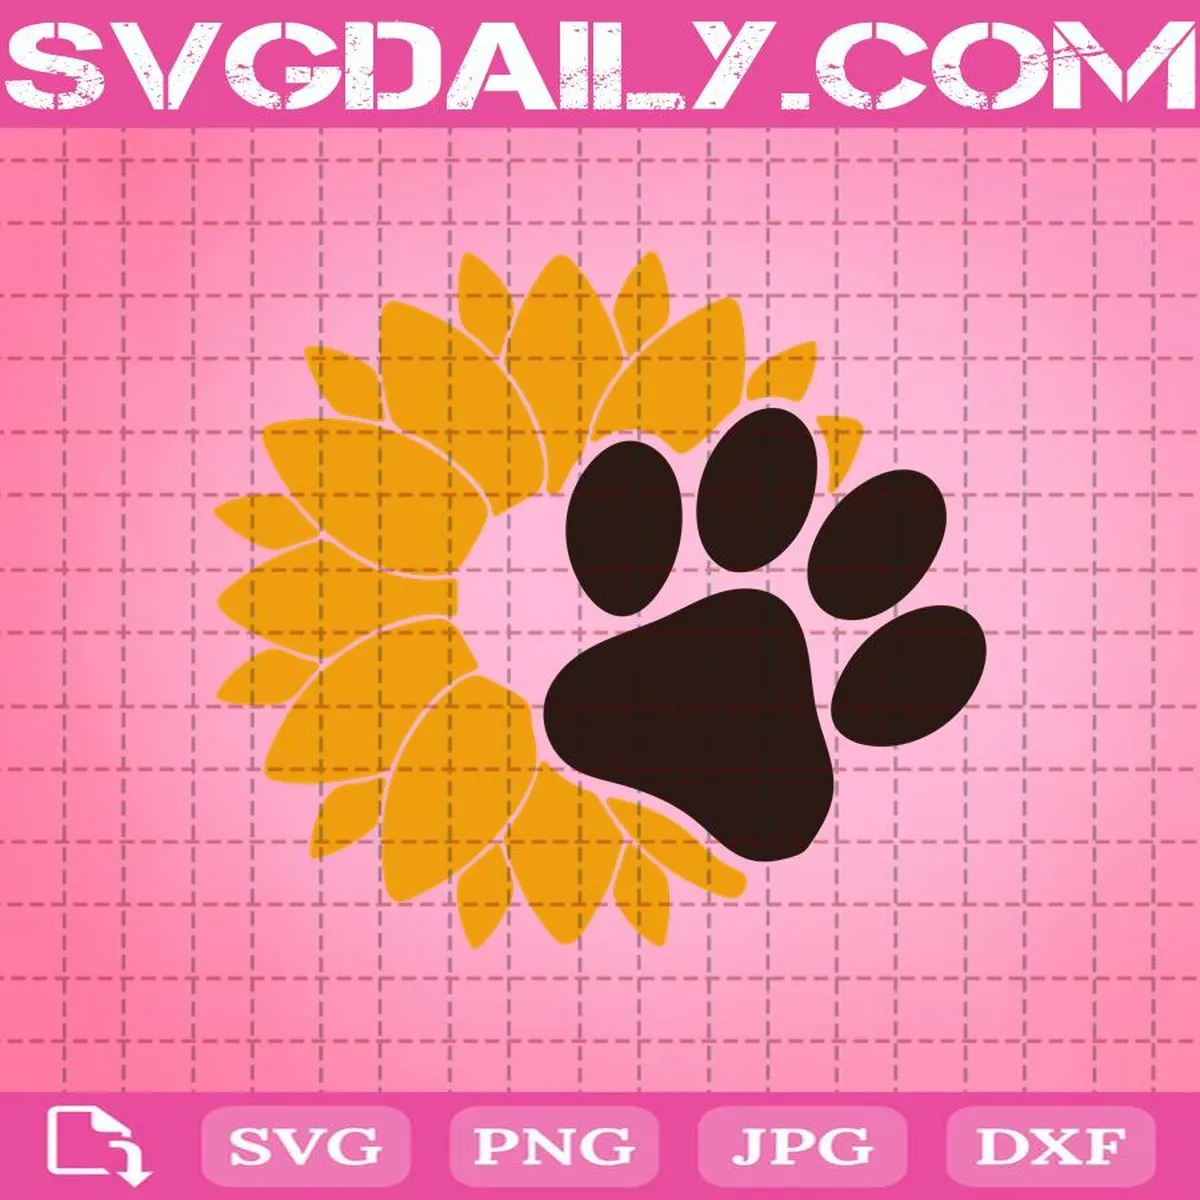 Sunflower Paw Svg, Sunflower Svg, Sunflower With Dog Paw Svg, Dog Mom Svg, Cat Mom Svg, Paw Svg, Svg Png Dxf Eps AI Instant Download